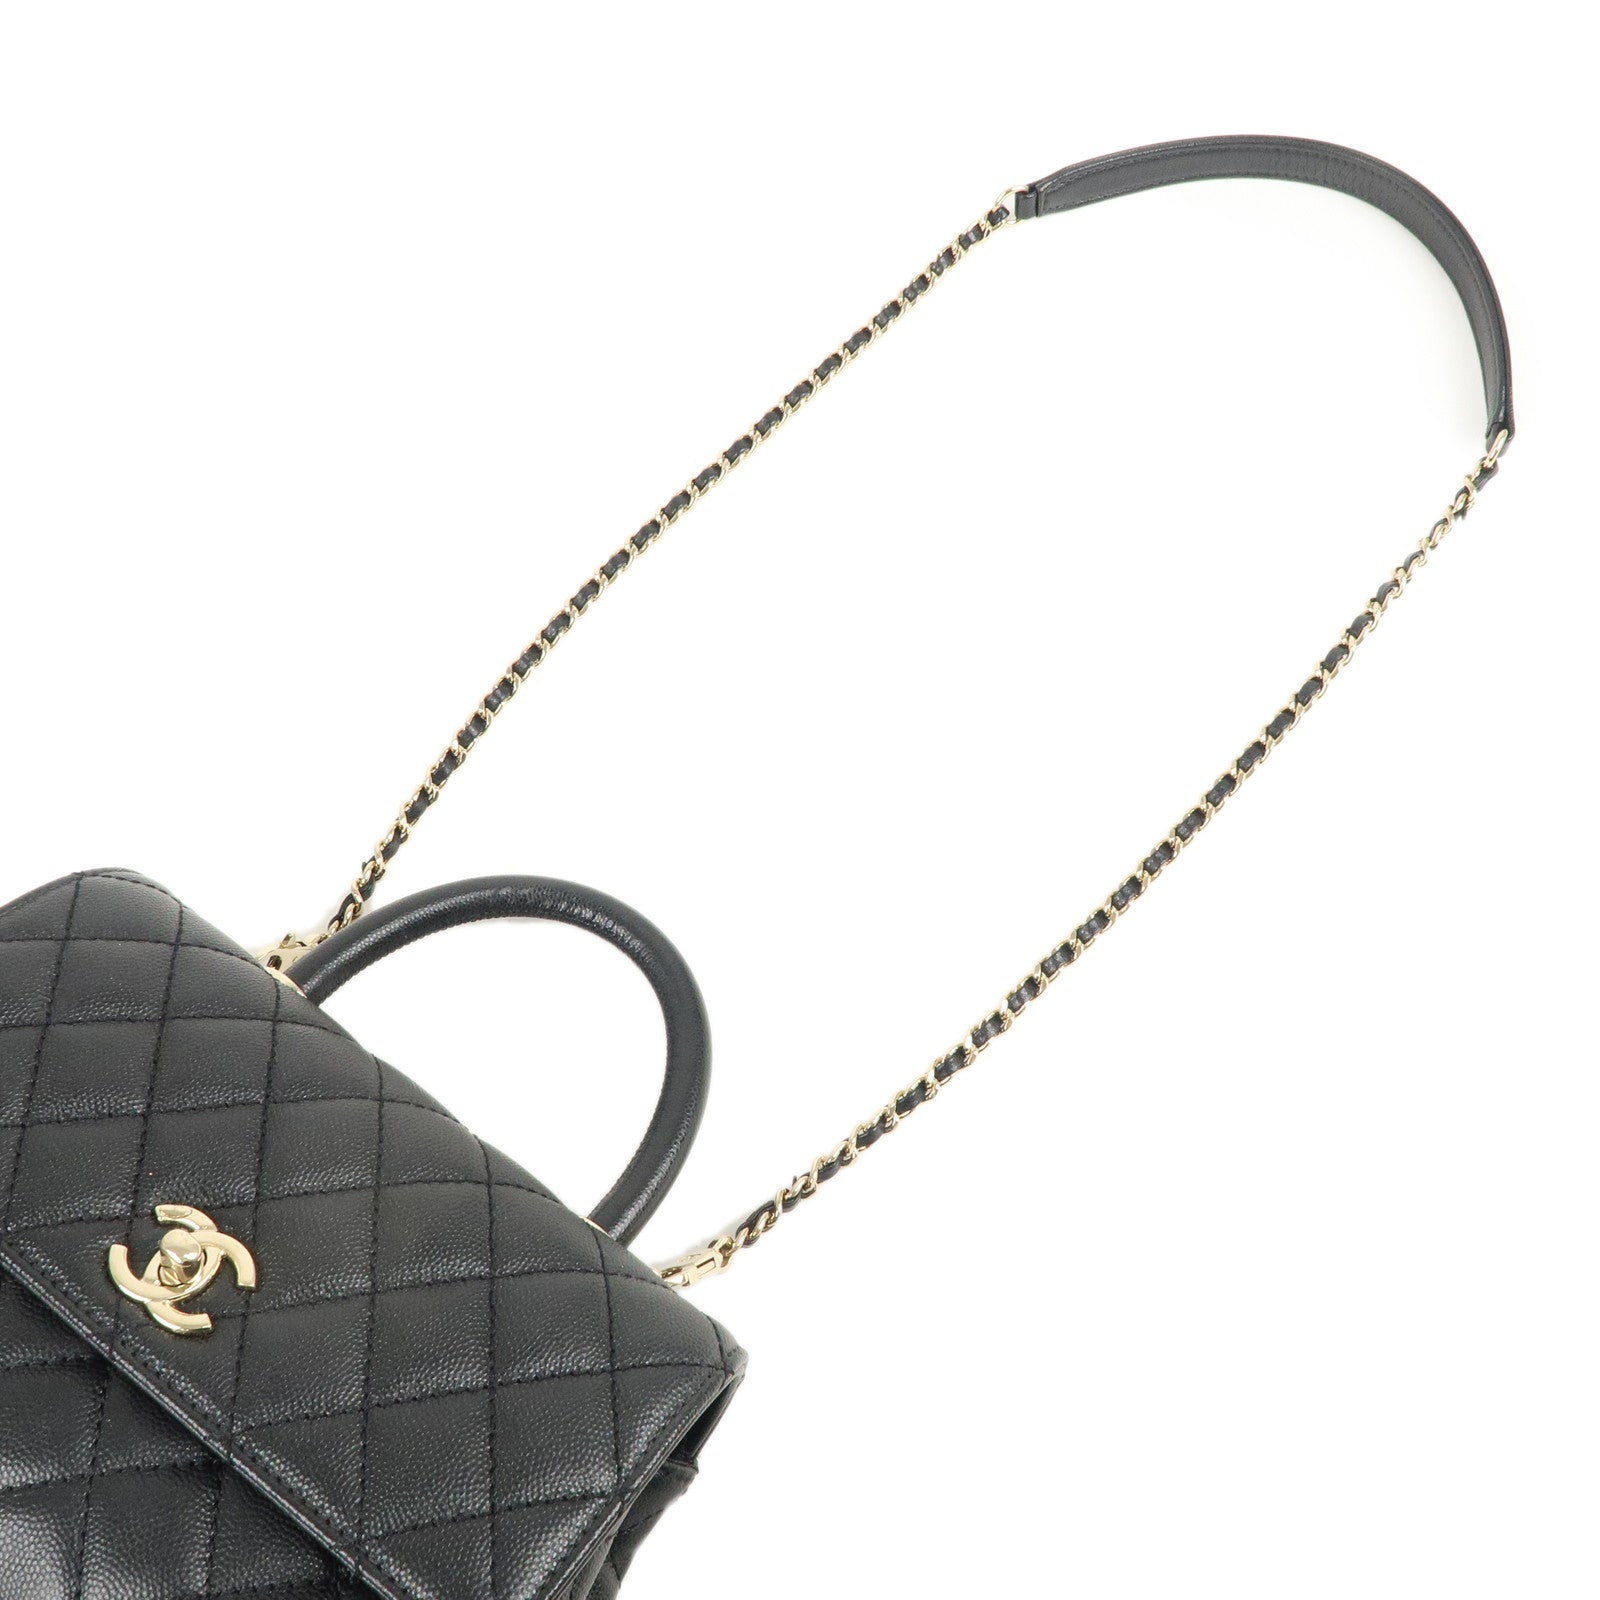 Auth CHANEL Small Top Handle Flap Bag/Matelasse/Coco Handle XS A92990 Black